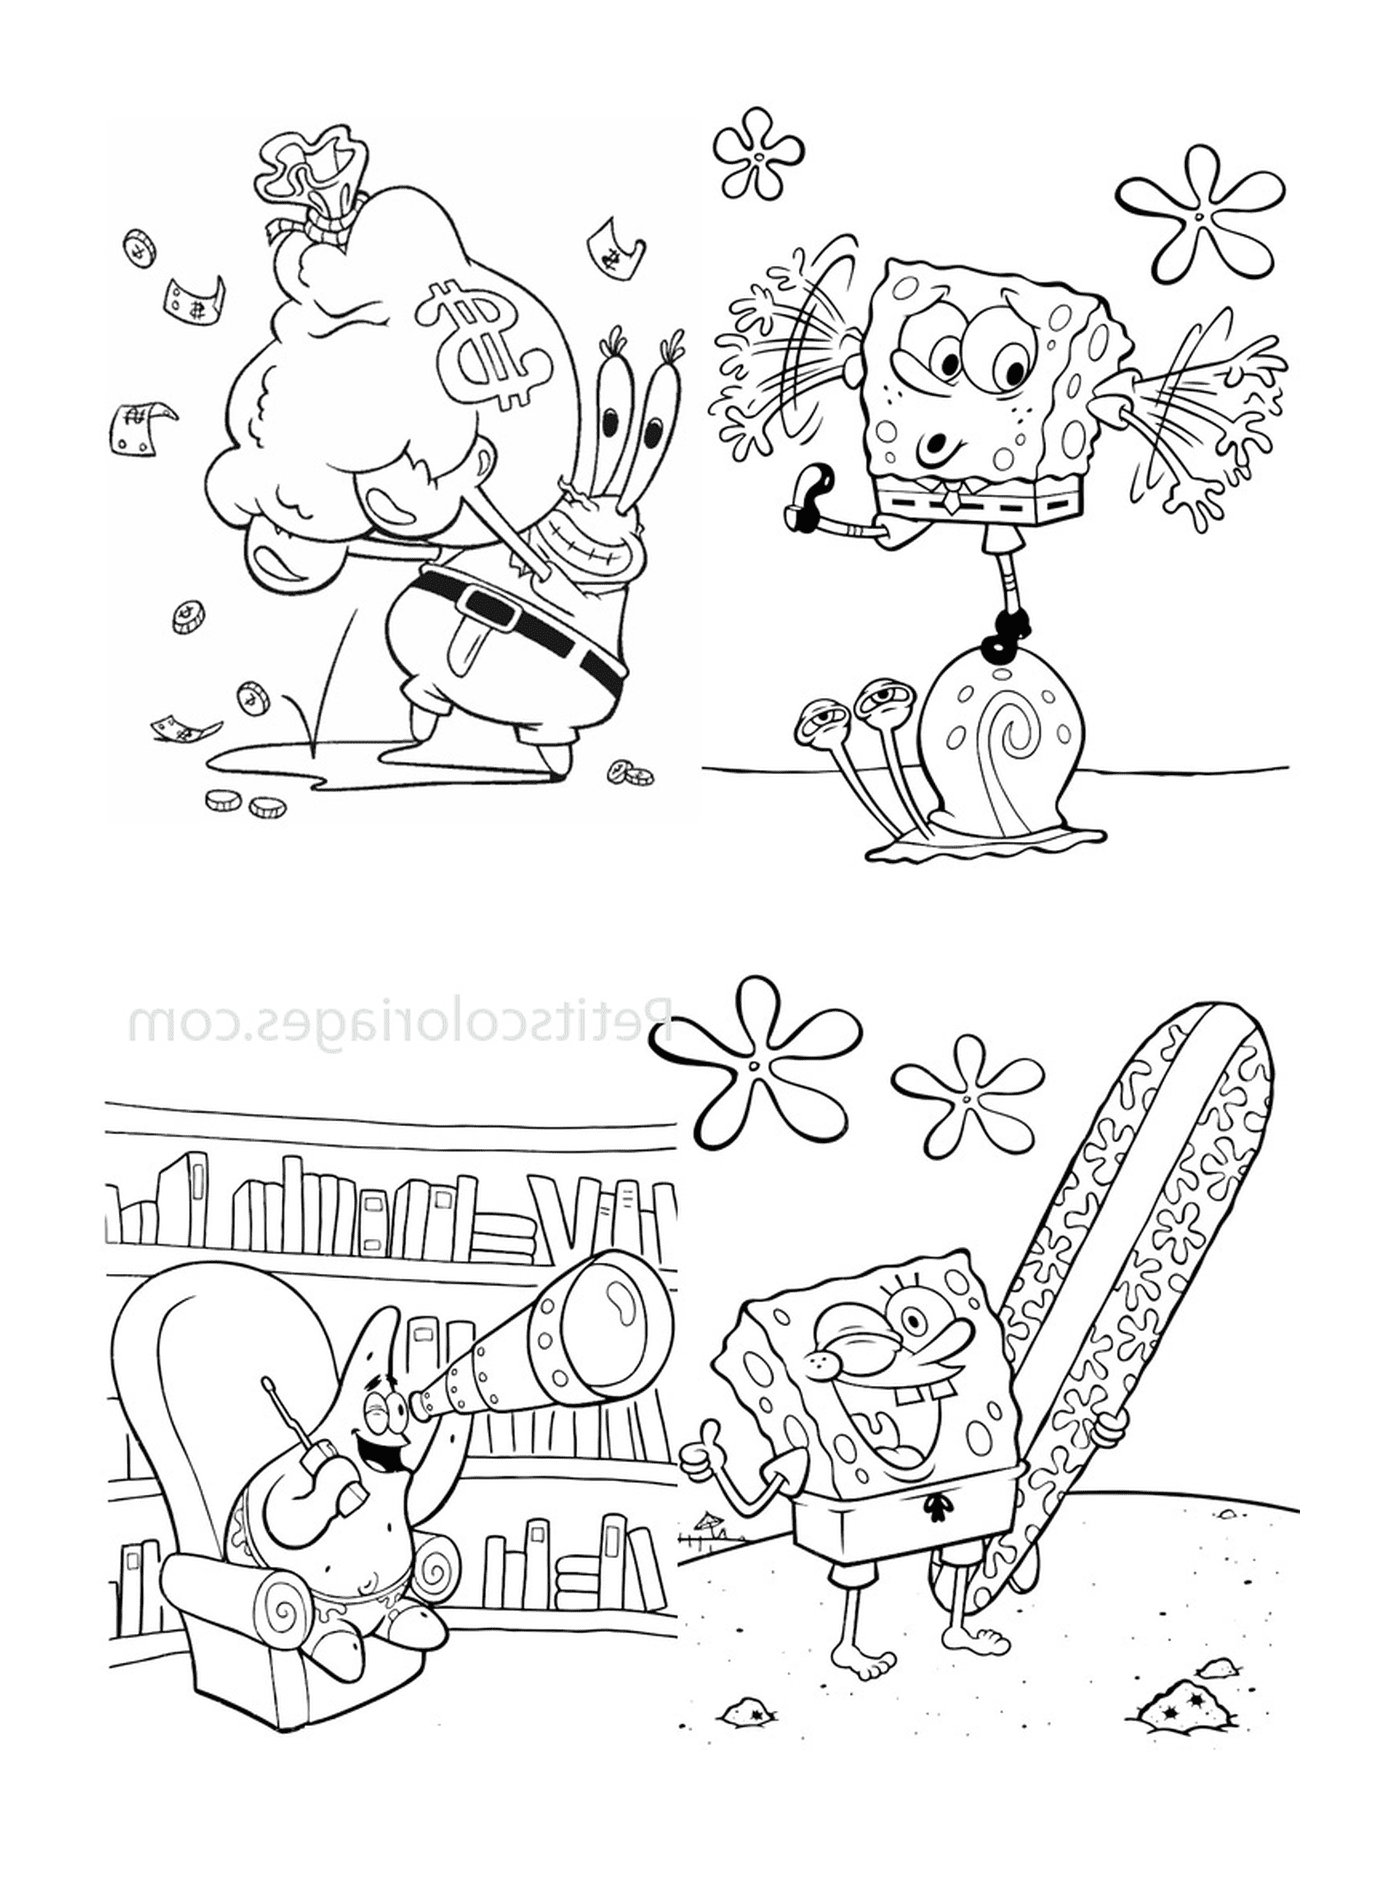  A set of drawings for children to color 